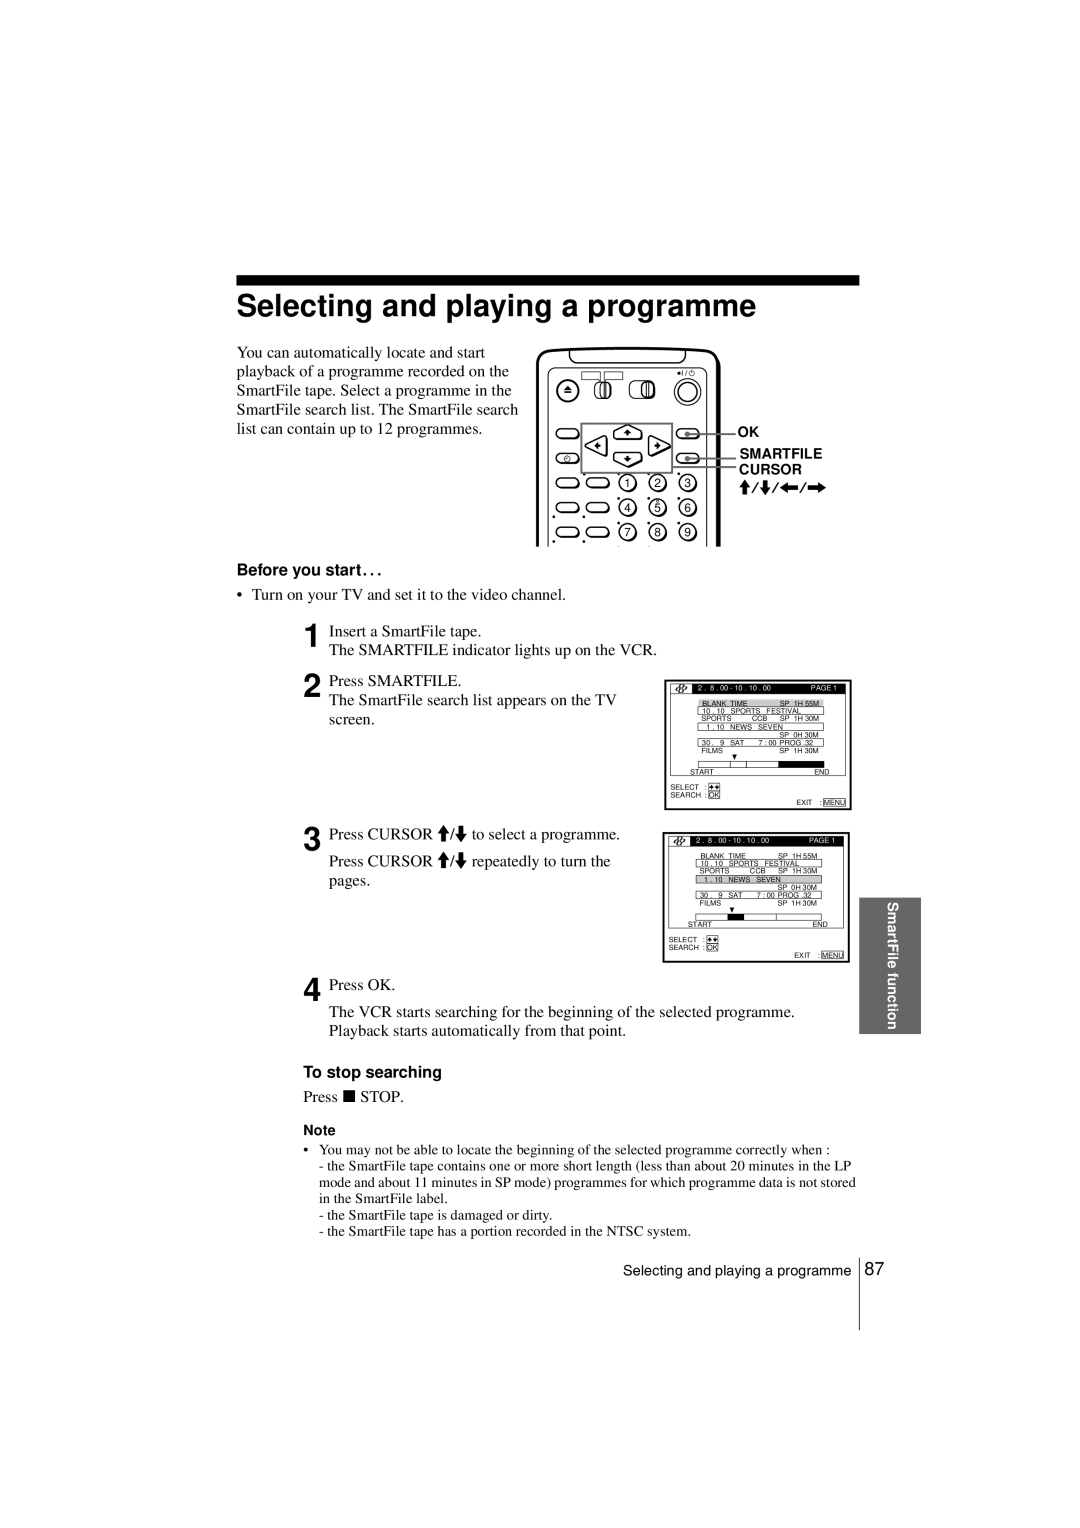 Sony SLV-SF990G manual Selecting and playing a programme, Before you start…, To stop searching 